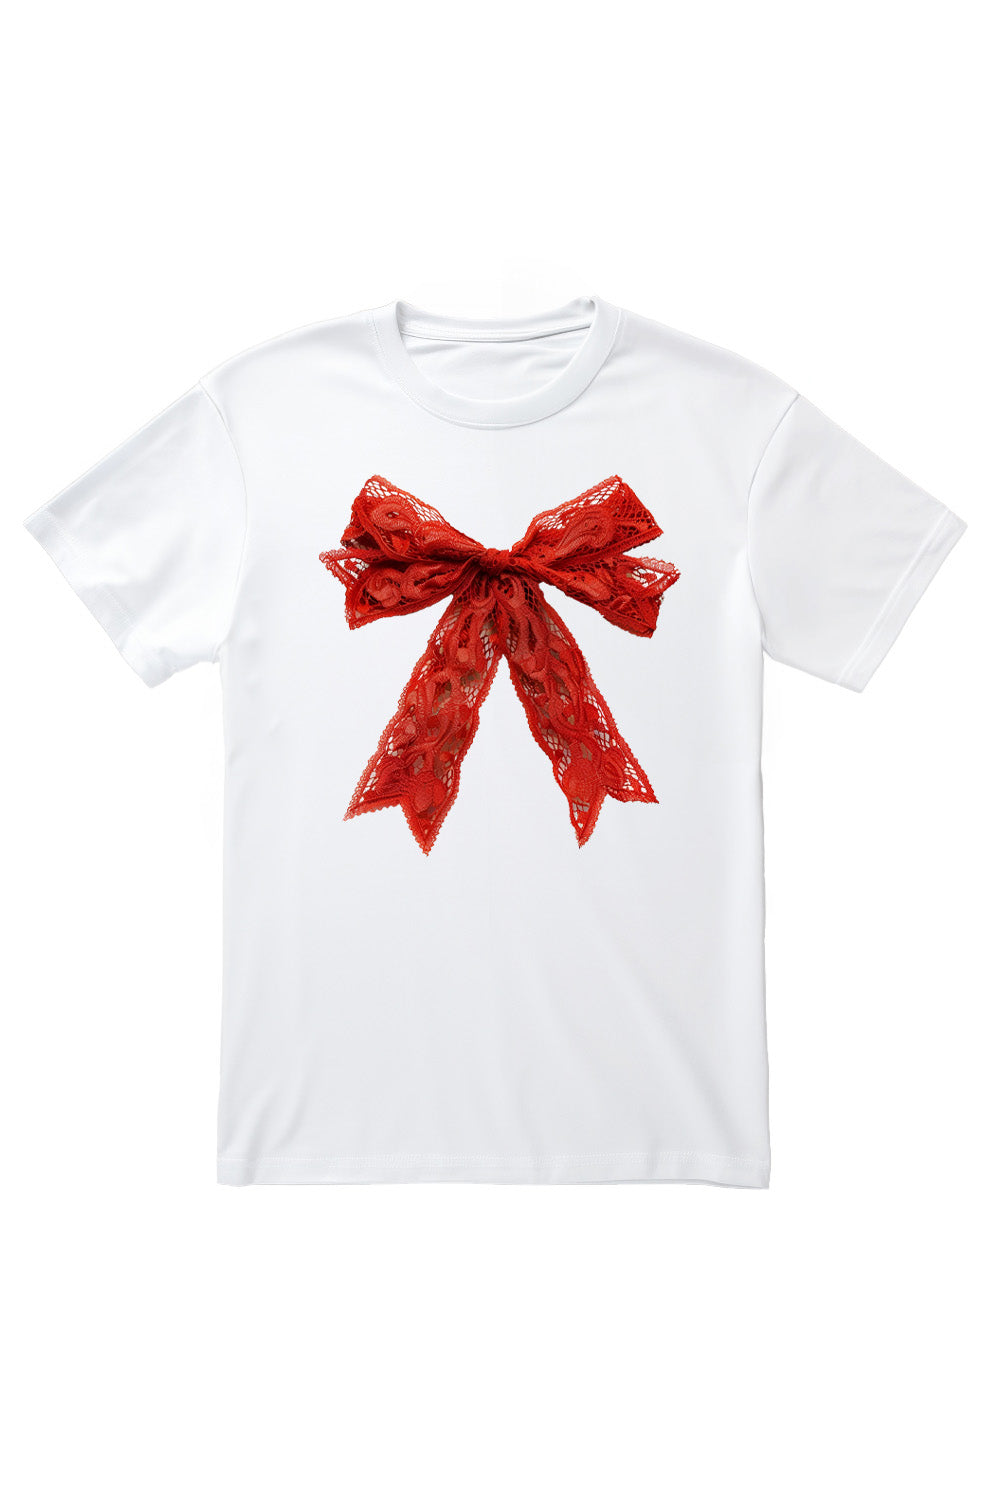 Red Lace Bow T-Shirt in White (Custom Packs)